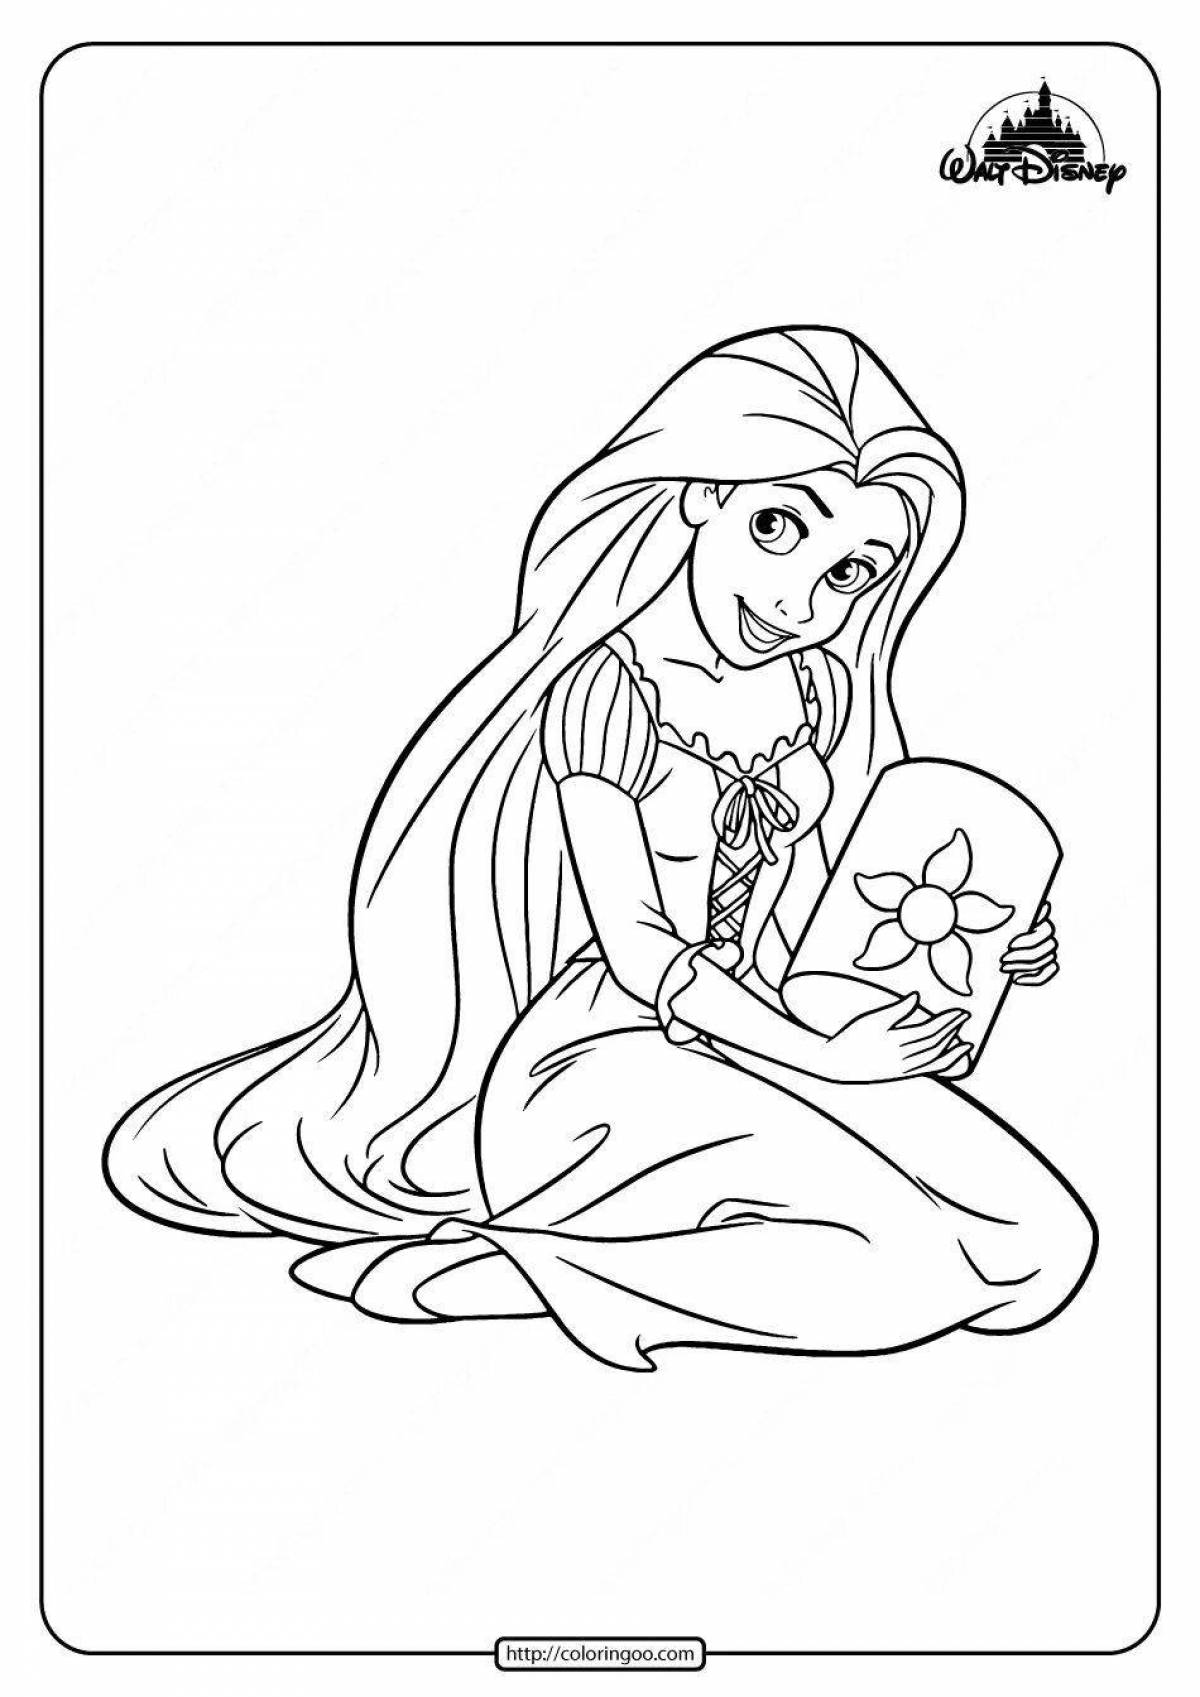 Rapunzel playful coloring book for kids 5-6 years old